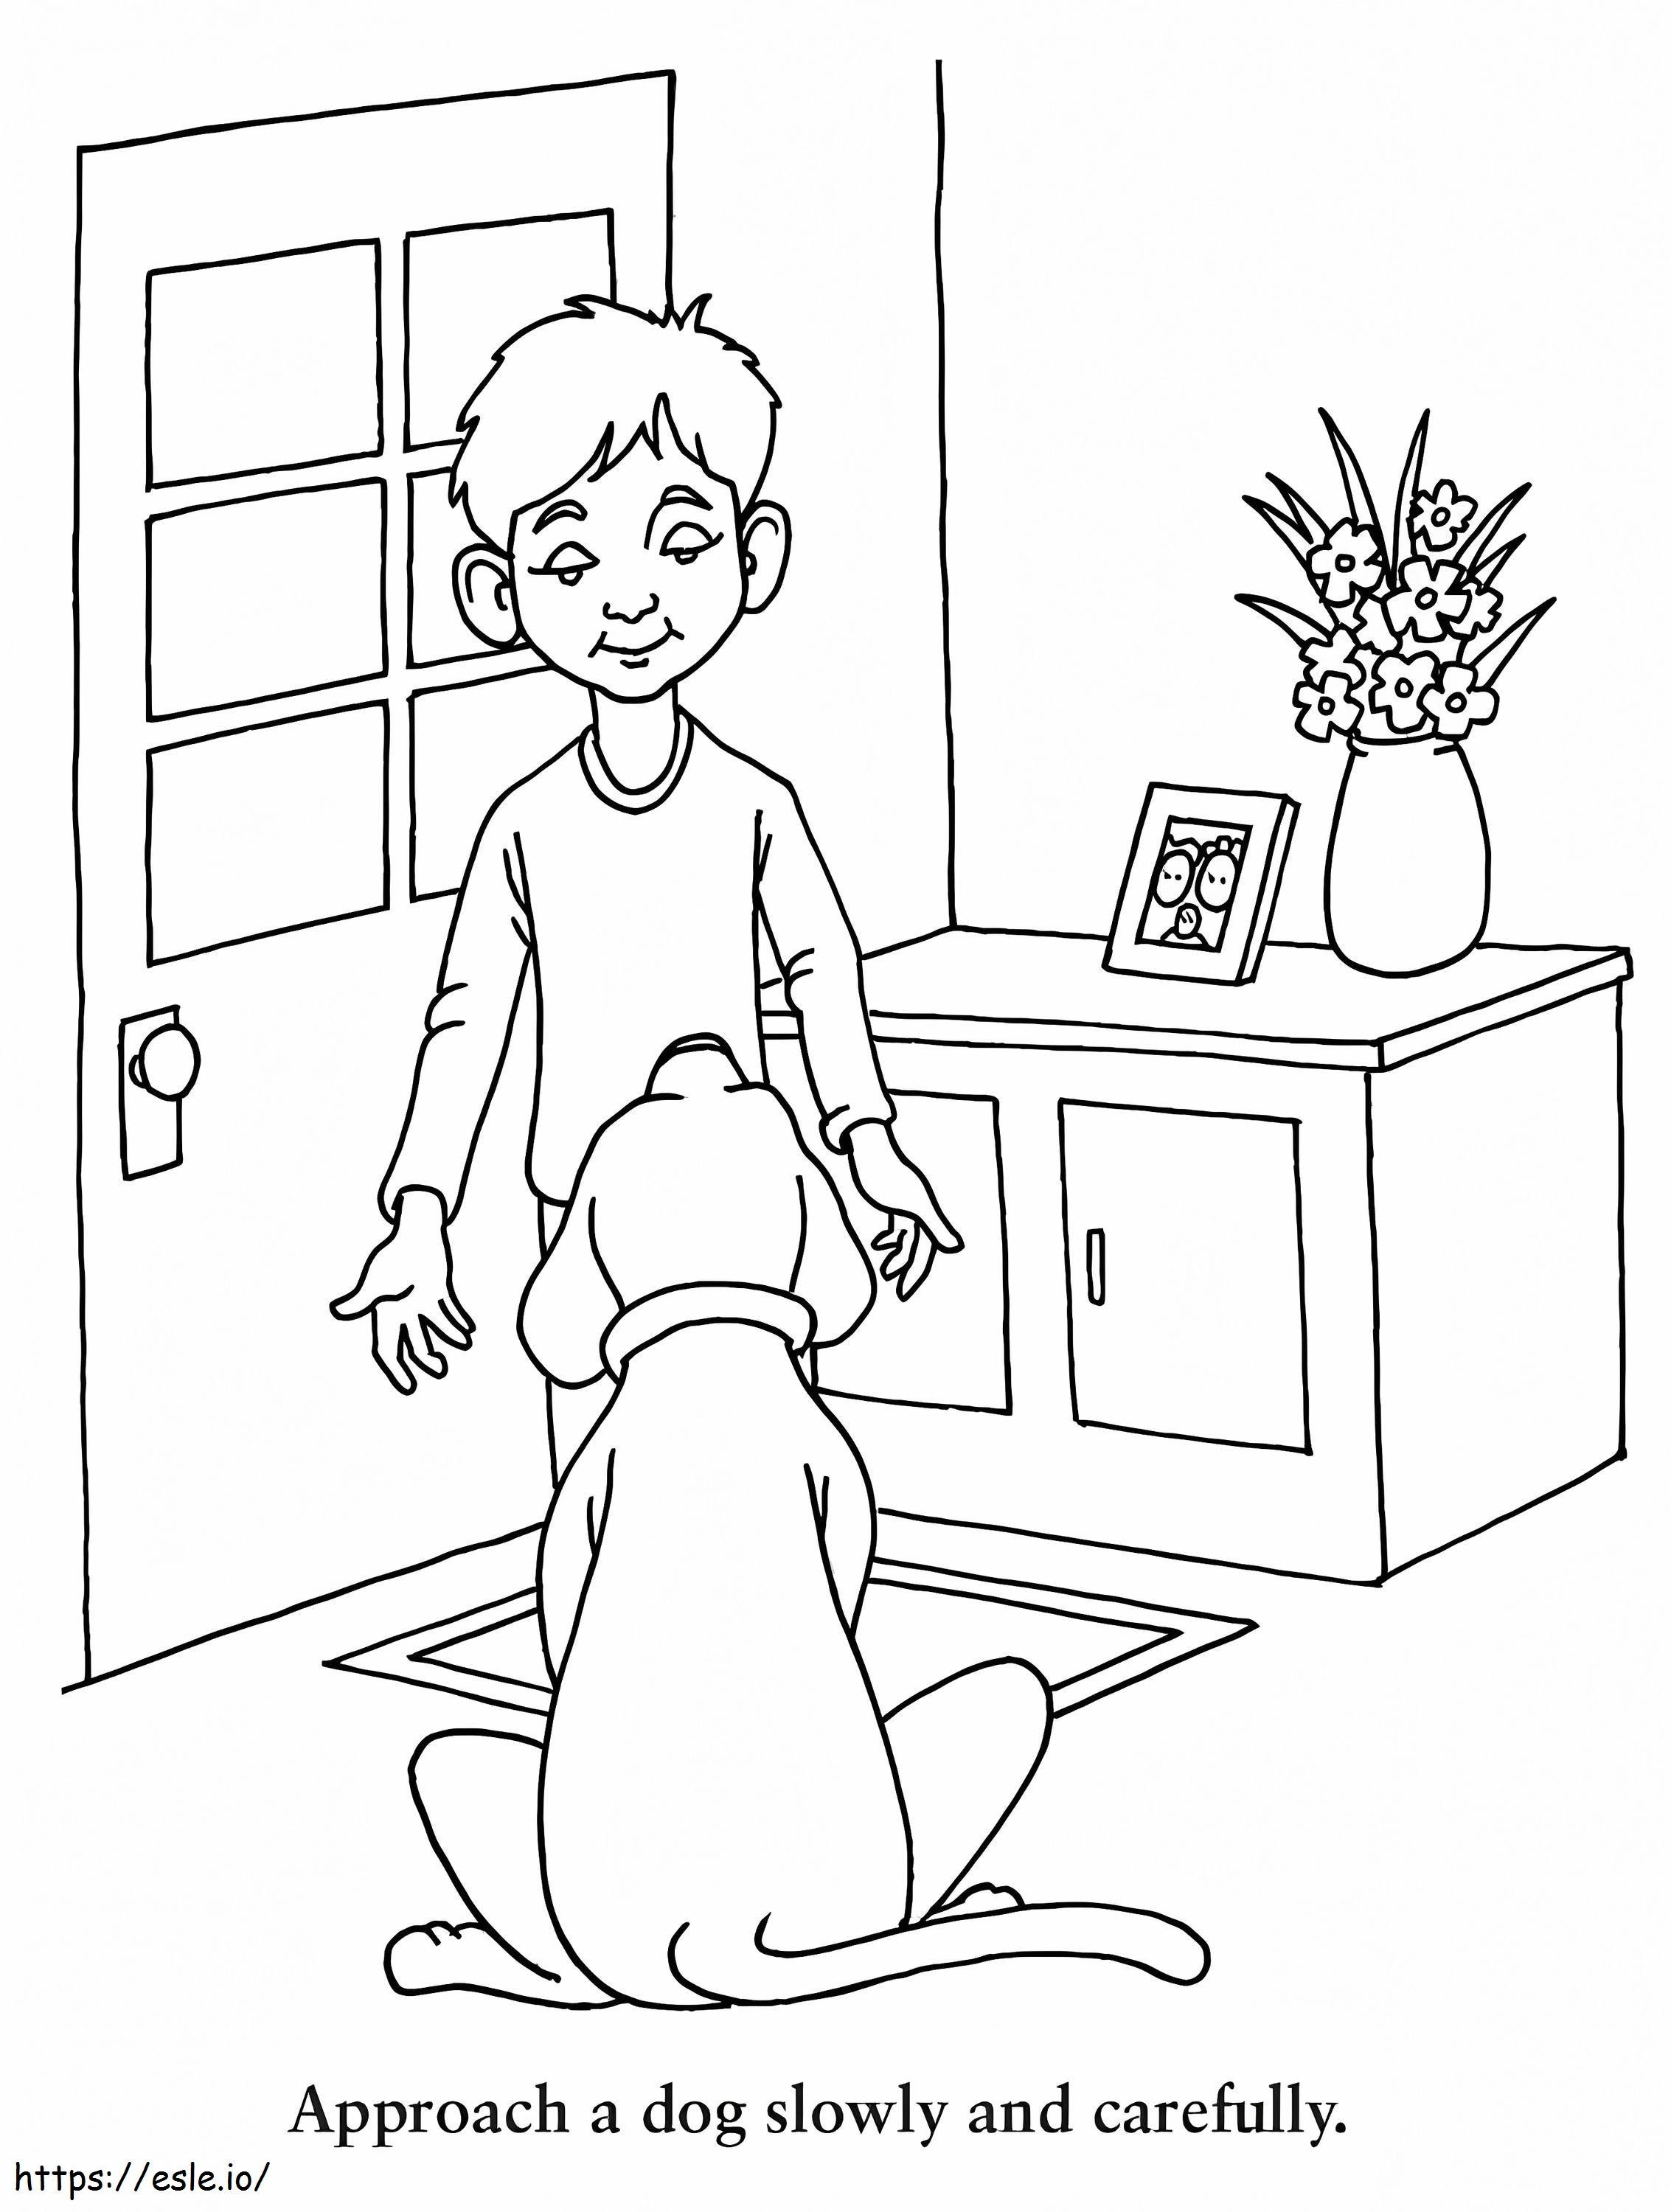 Dog Safety Printable coloring page